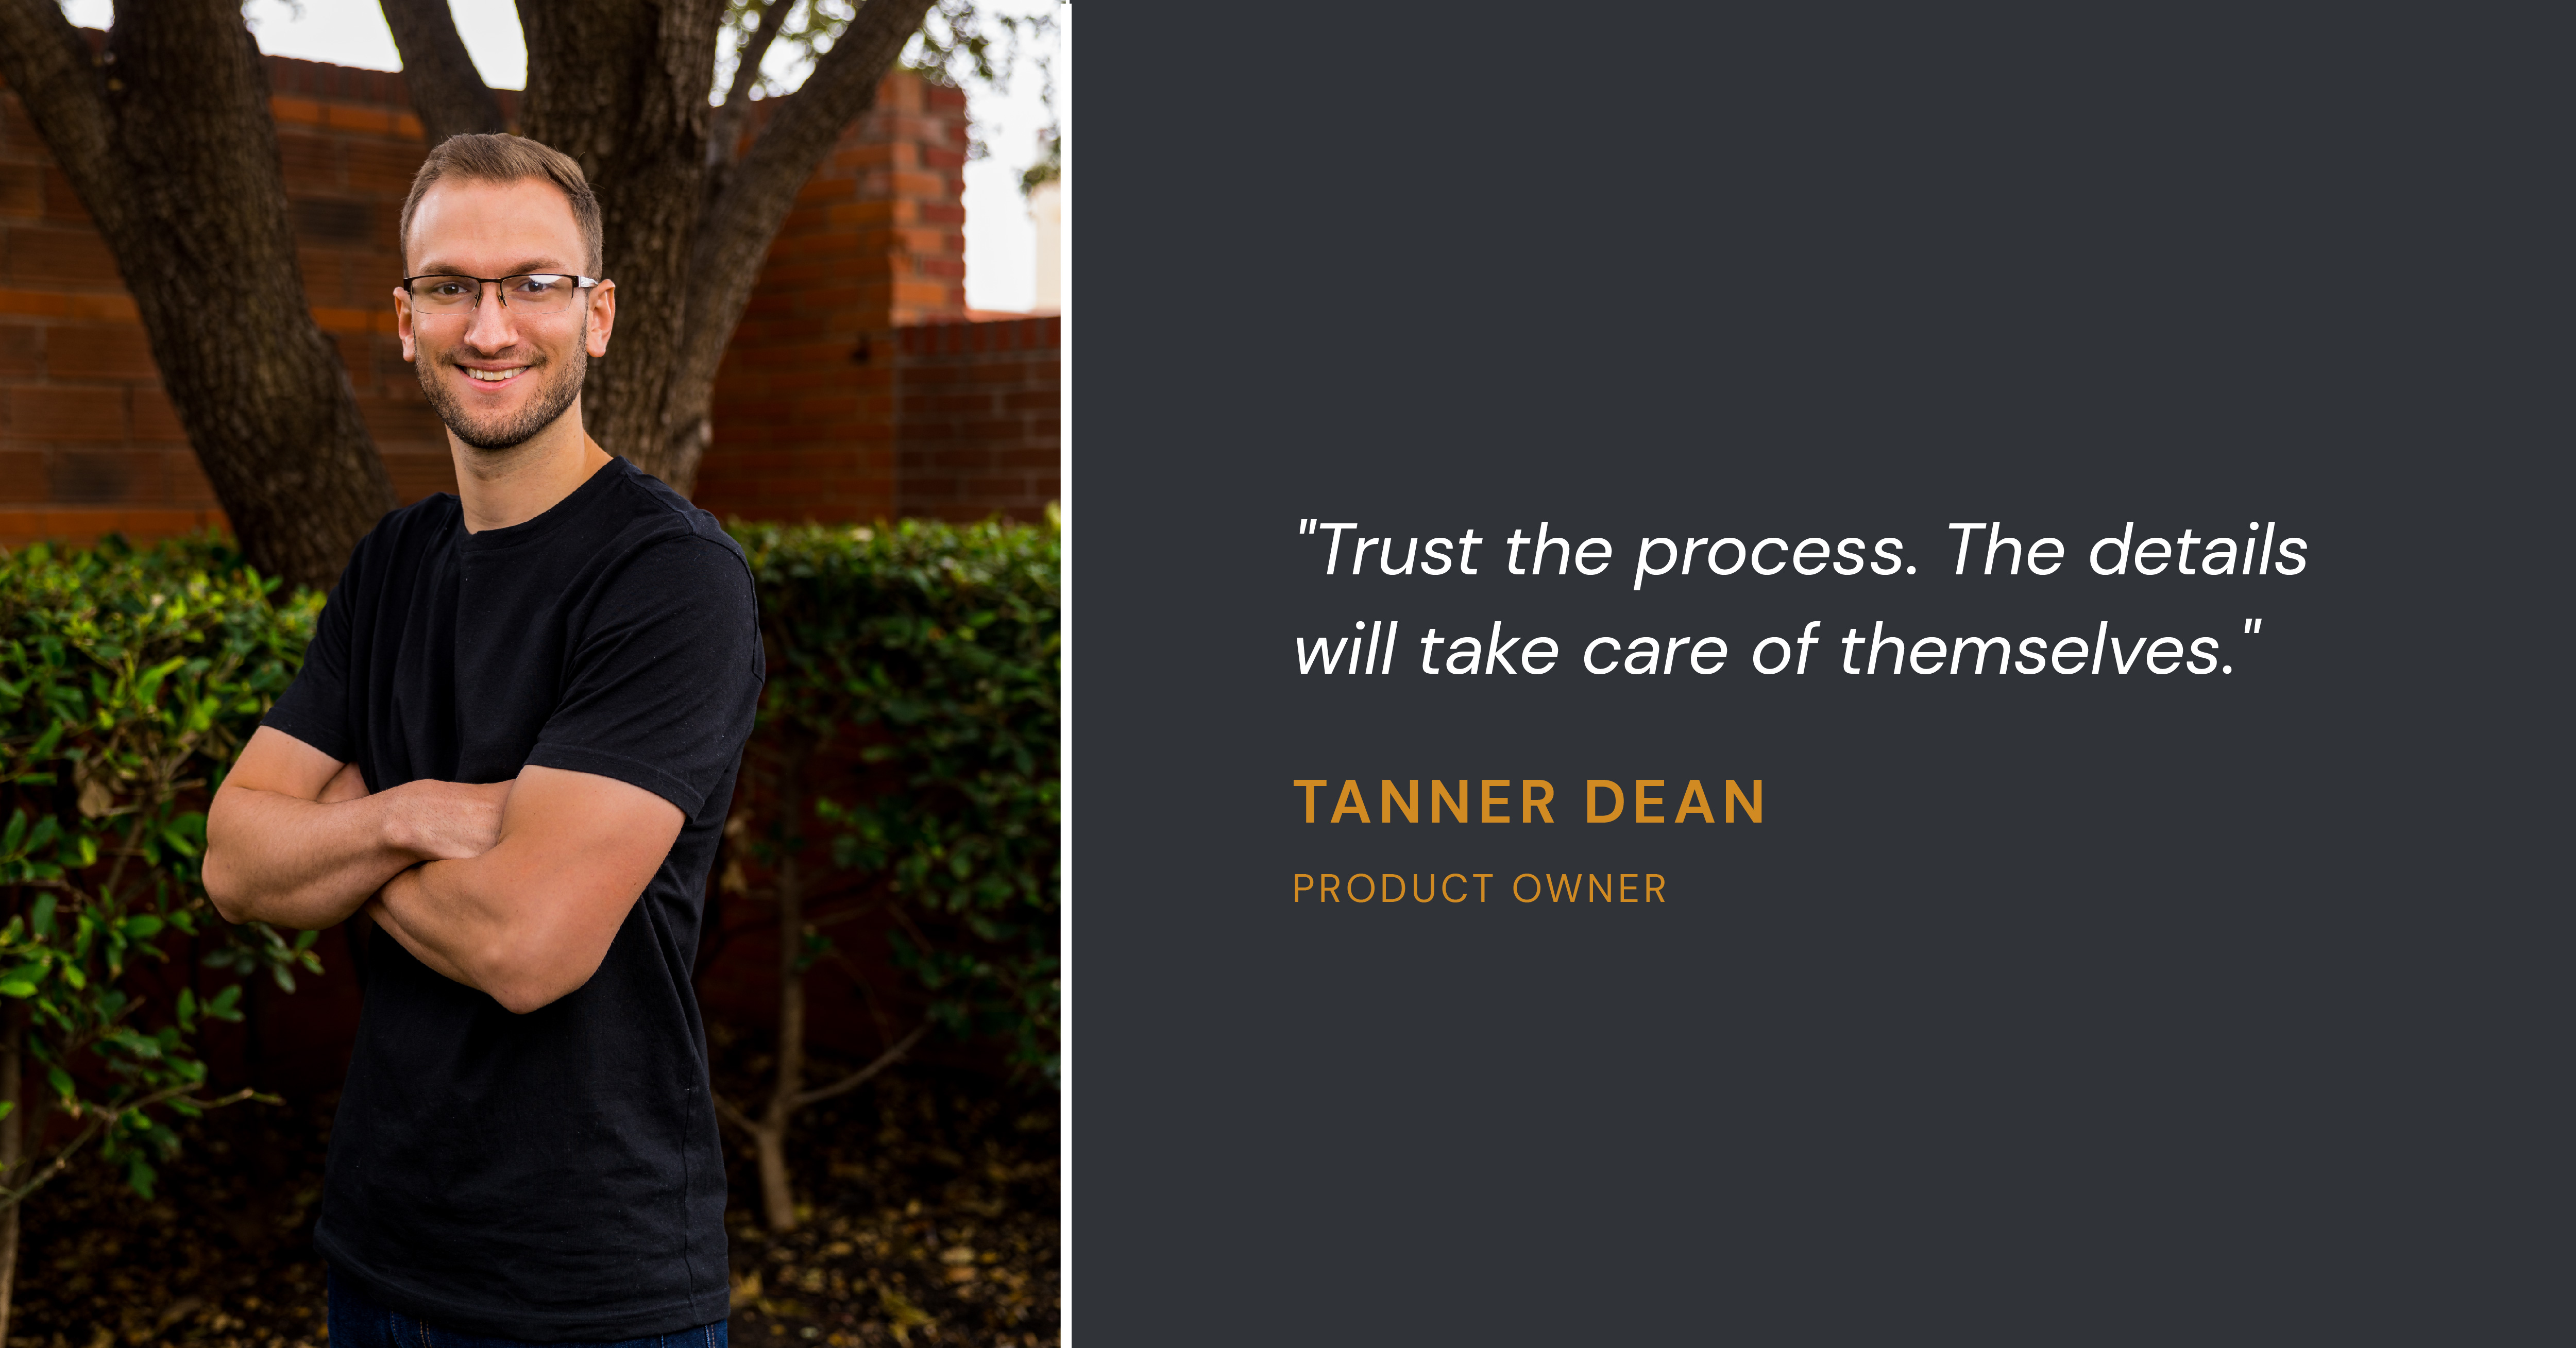 Tanner Dean - Product Owner